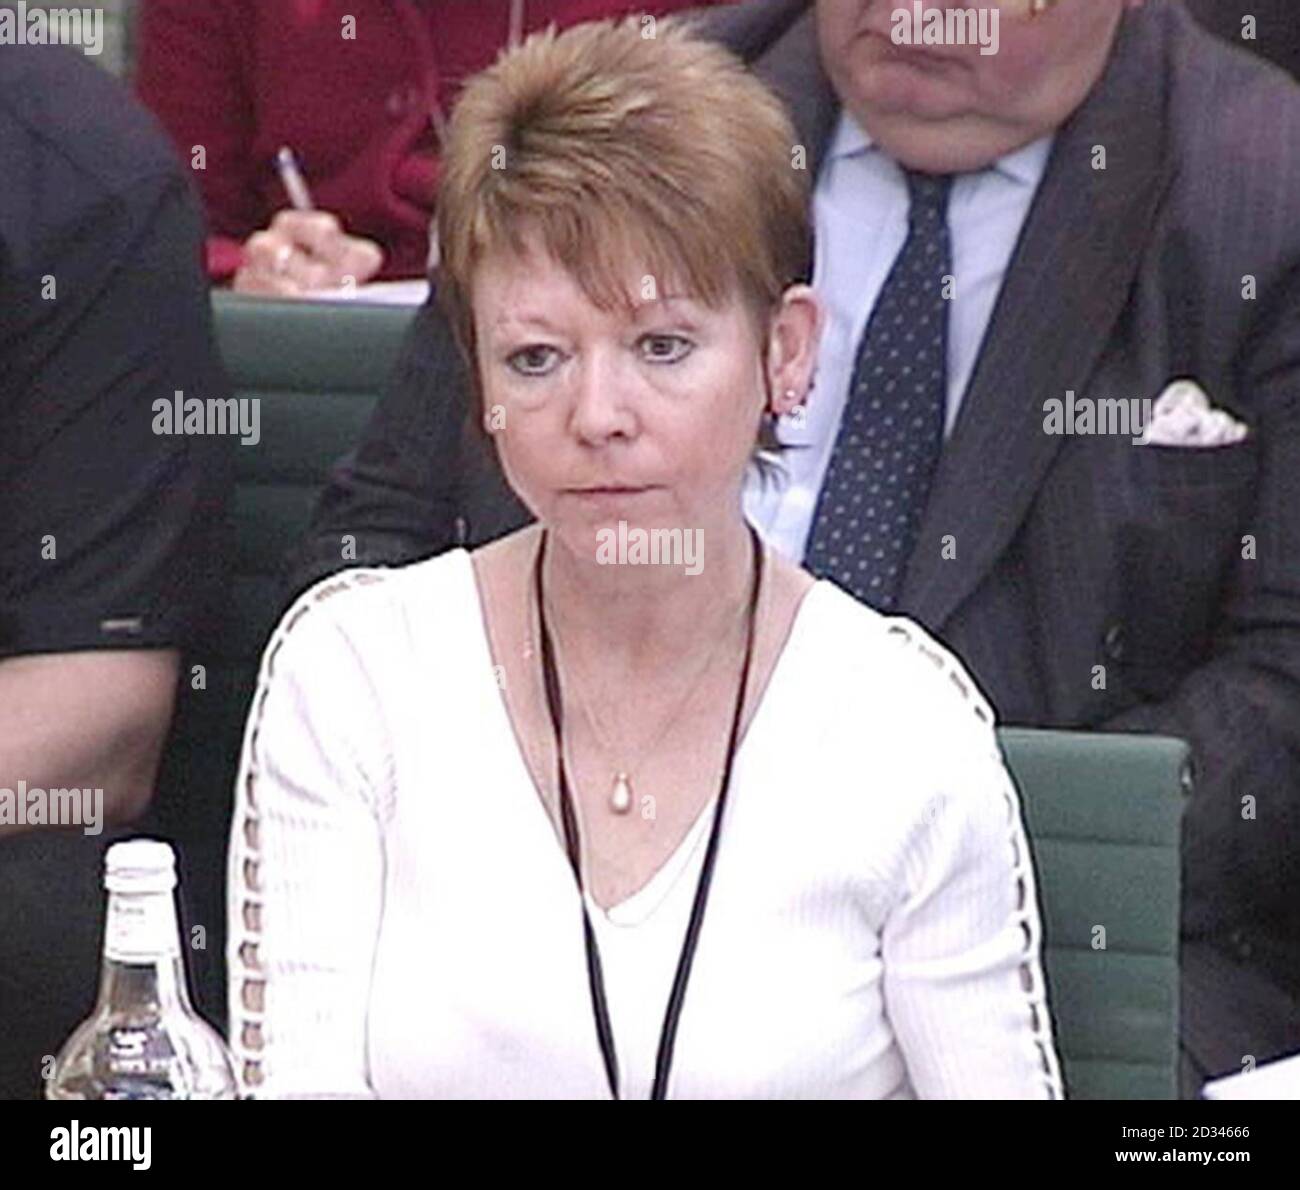 Janet Mattin, a parent of a soldier who died at the controversial Deepcut barracks gives evidence to the House of Common's defence committe in London as they step up their demands for a public inquiry. The Government yesterday announced a new review of allegations of abuse and bullying at the Army barracks. But is stopped short of the full public inquiry demanded by families and MPs. Four young solders at the Surrey base have died of gunshot wounds in unexplained circumstances. Stock Photo